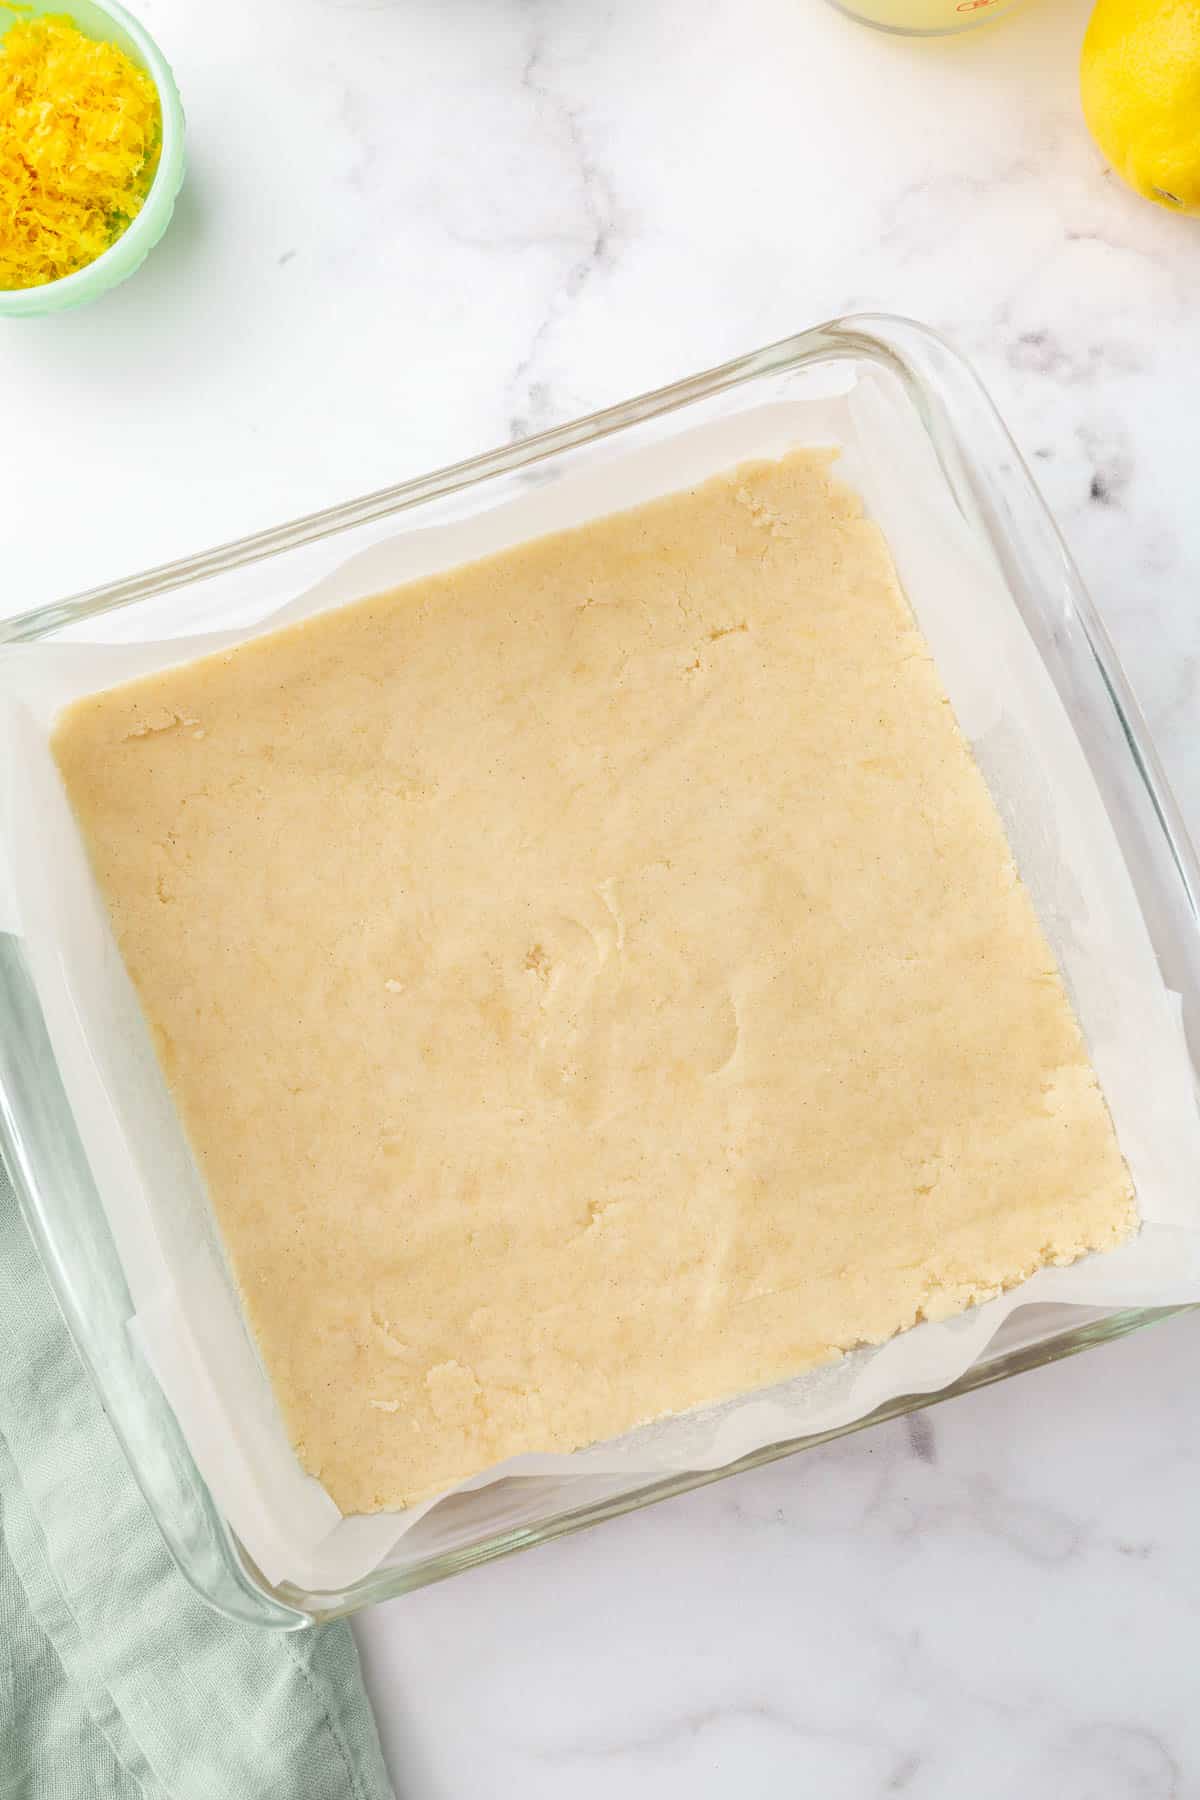 A square glass baking dish with a gluten free shortbread dough in it before baking in the oven.